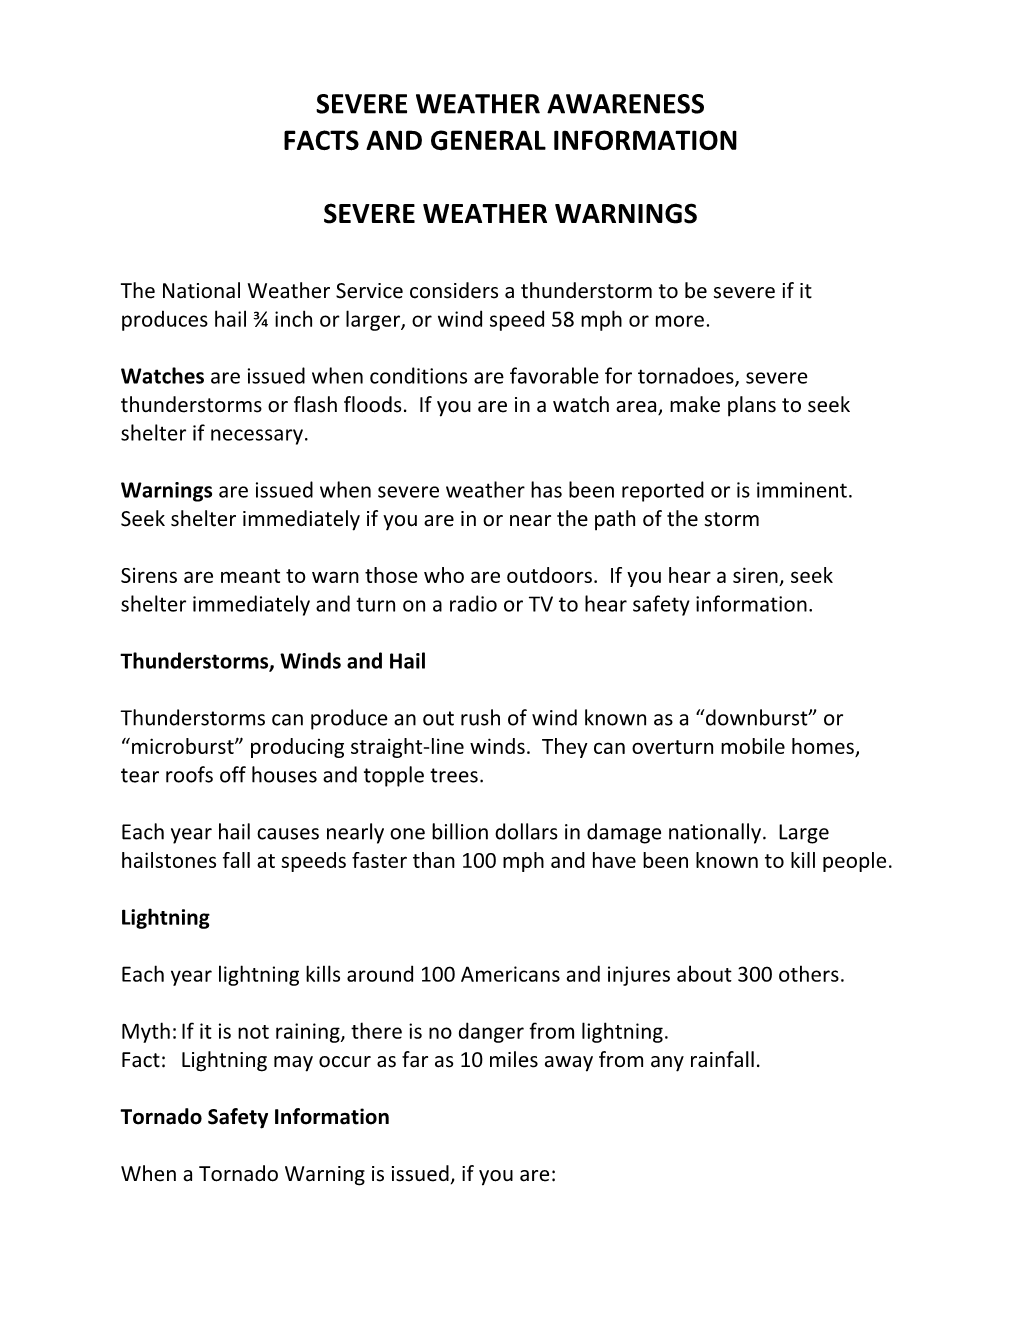 Severe Weather Awareness Facts and General Information